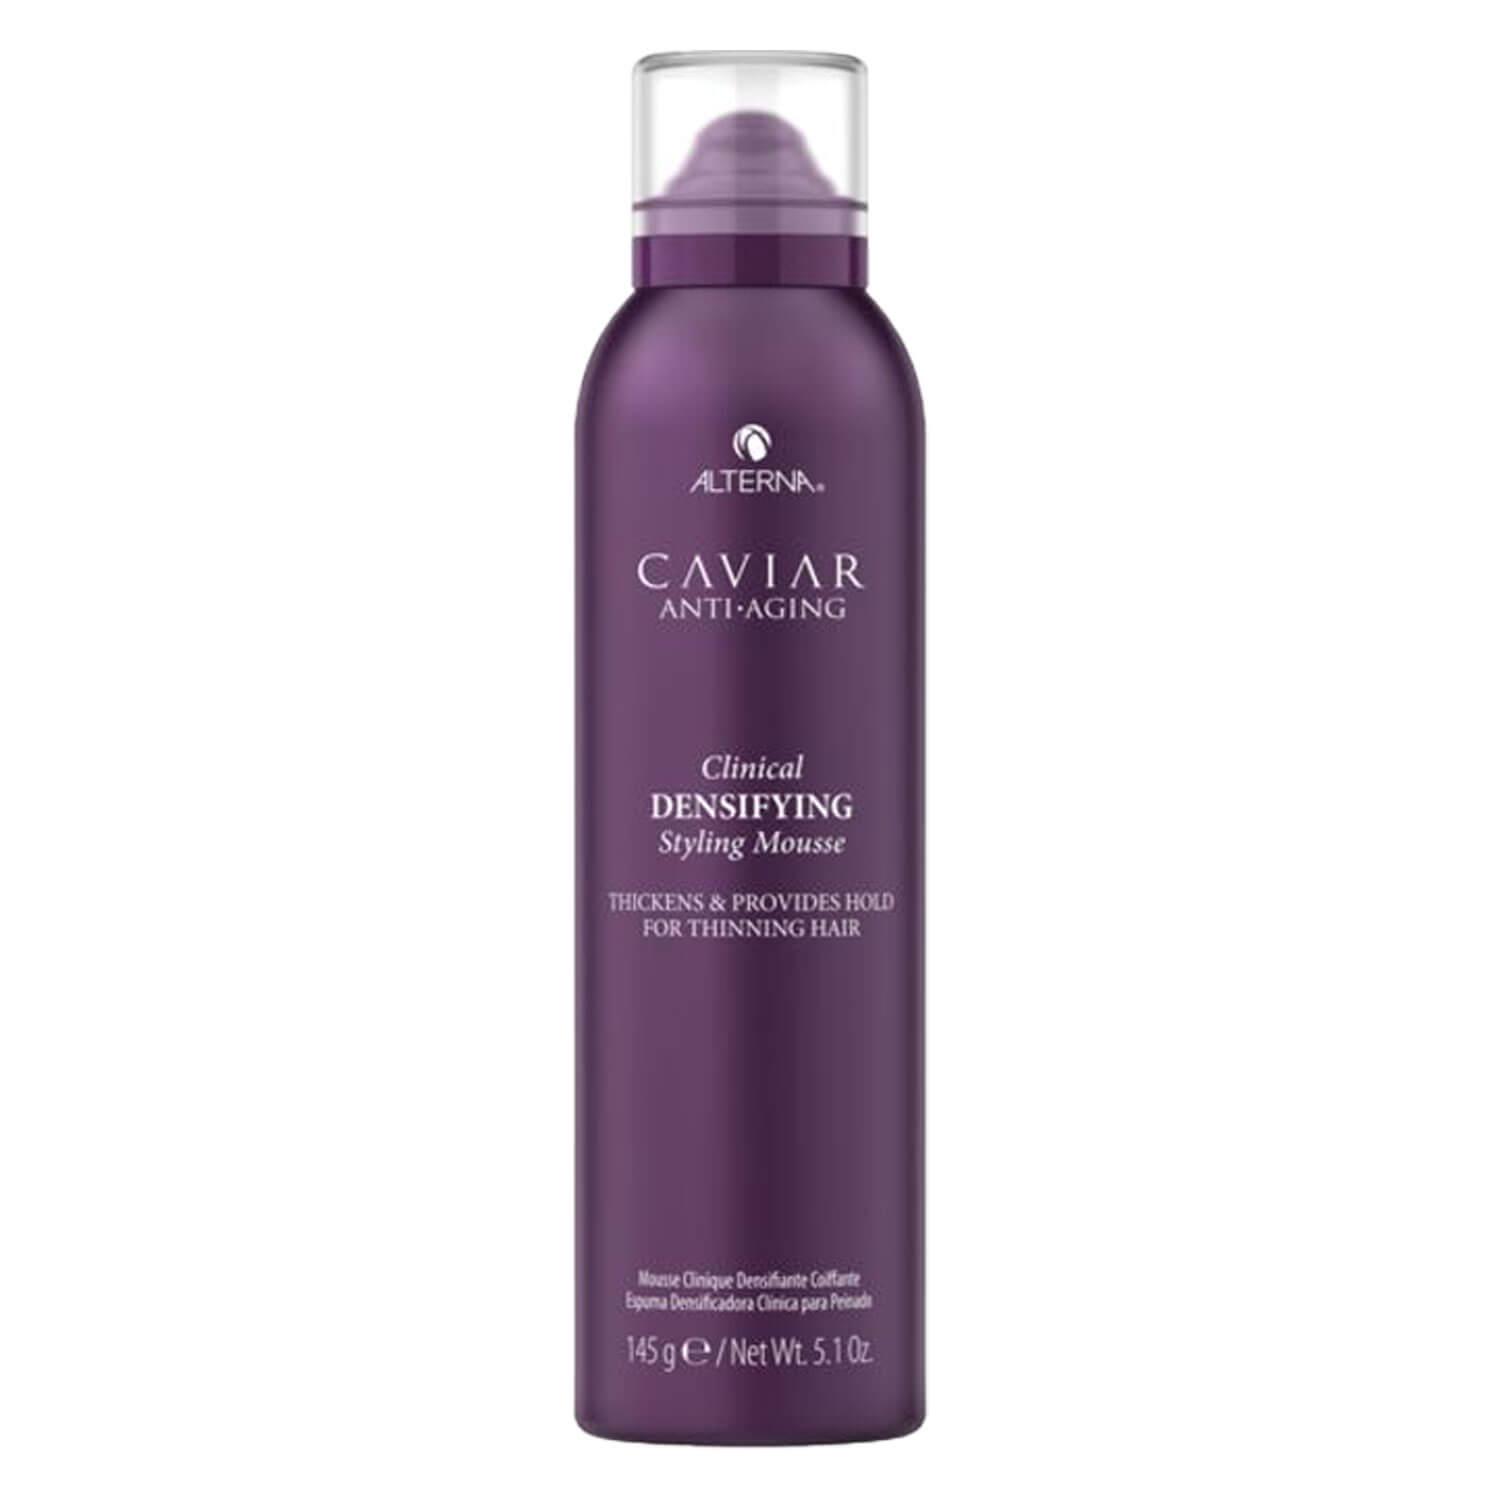 Caviar Clinical - Densifying Styling Mousse